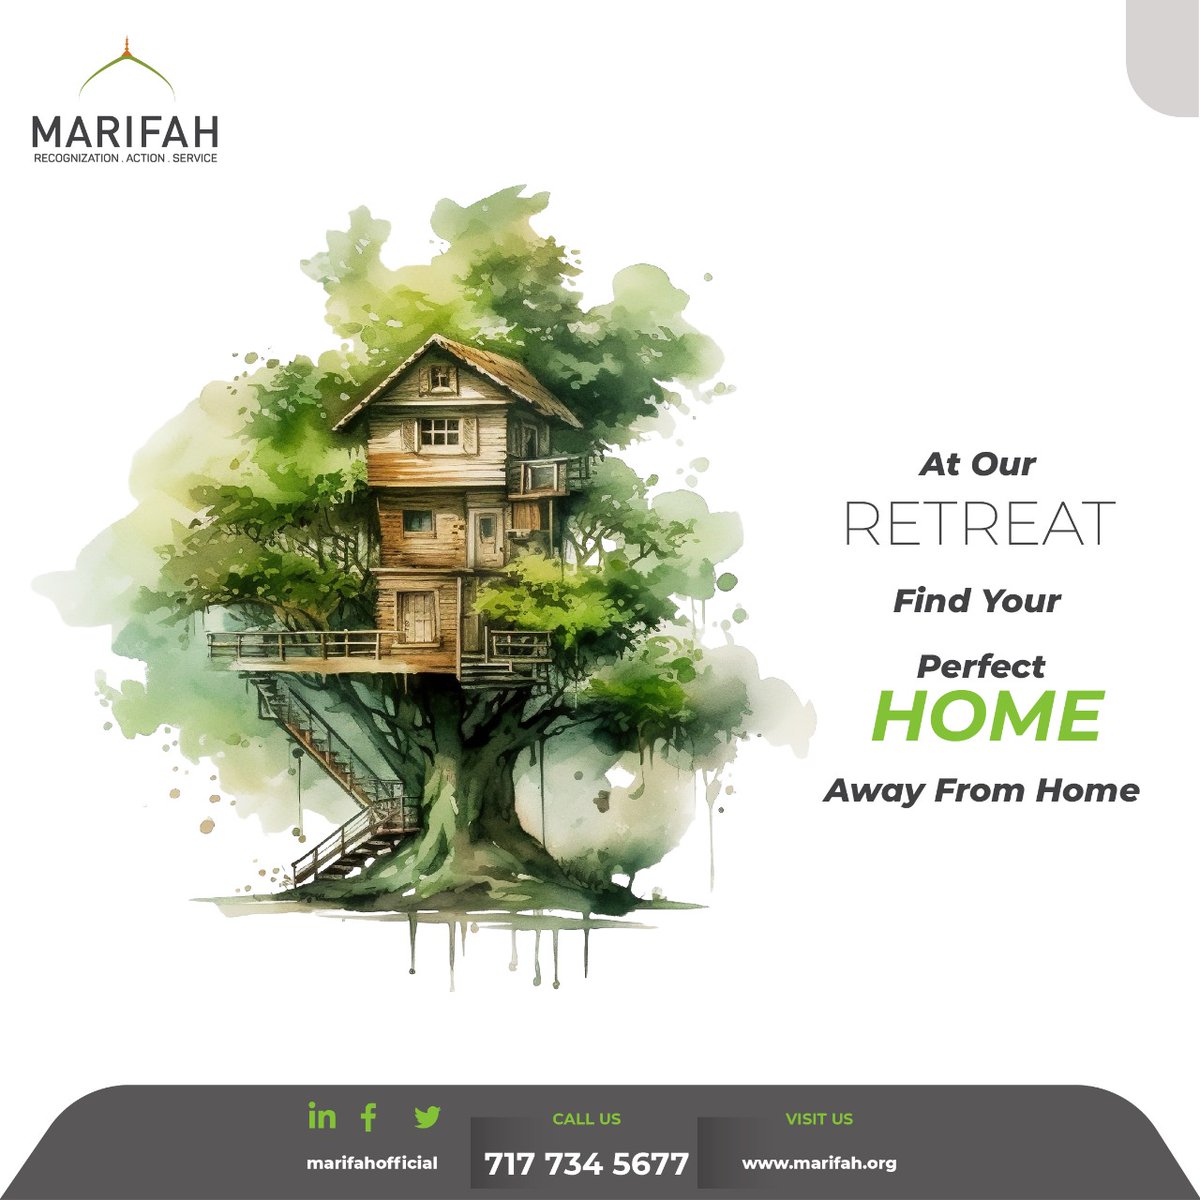 At Marifah, we redefine 'home away from home.' Embrace comfort, serenity, and relaxation. Your retreat is ready and waiting. Book now!
Visit Us:  marifah.org
.
#Marifah #Marifahinn #Rahmagarden #HomeAwayFromHome #SerenityRetreat #TranquilEscape #ComfortableGetaway